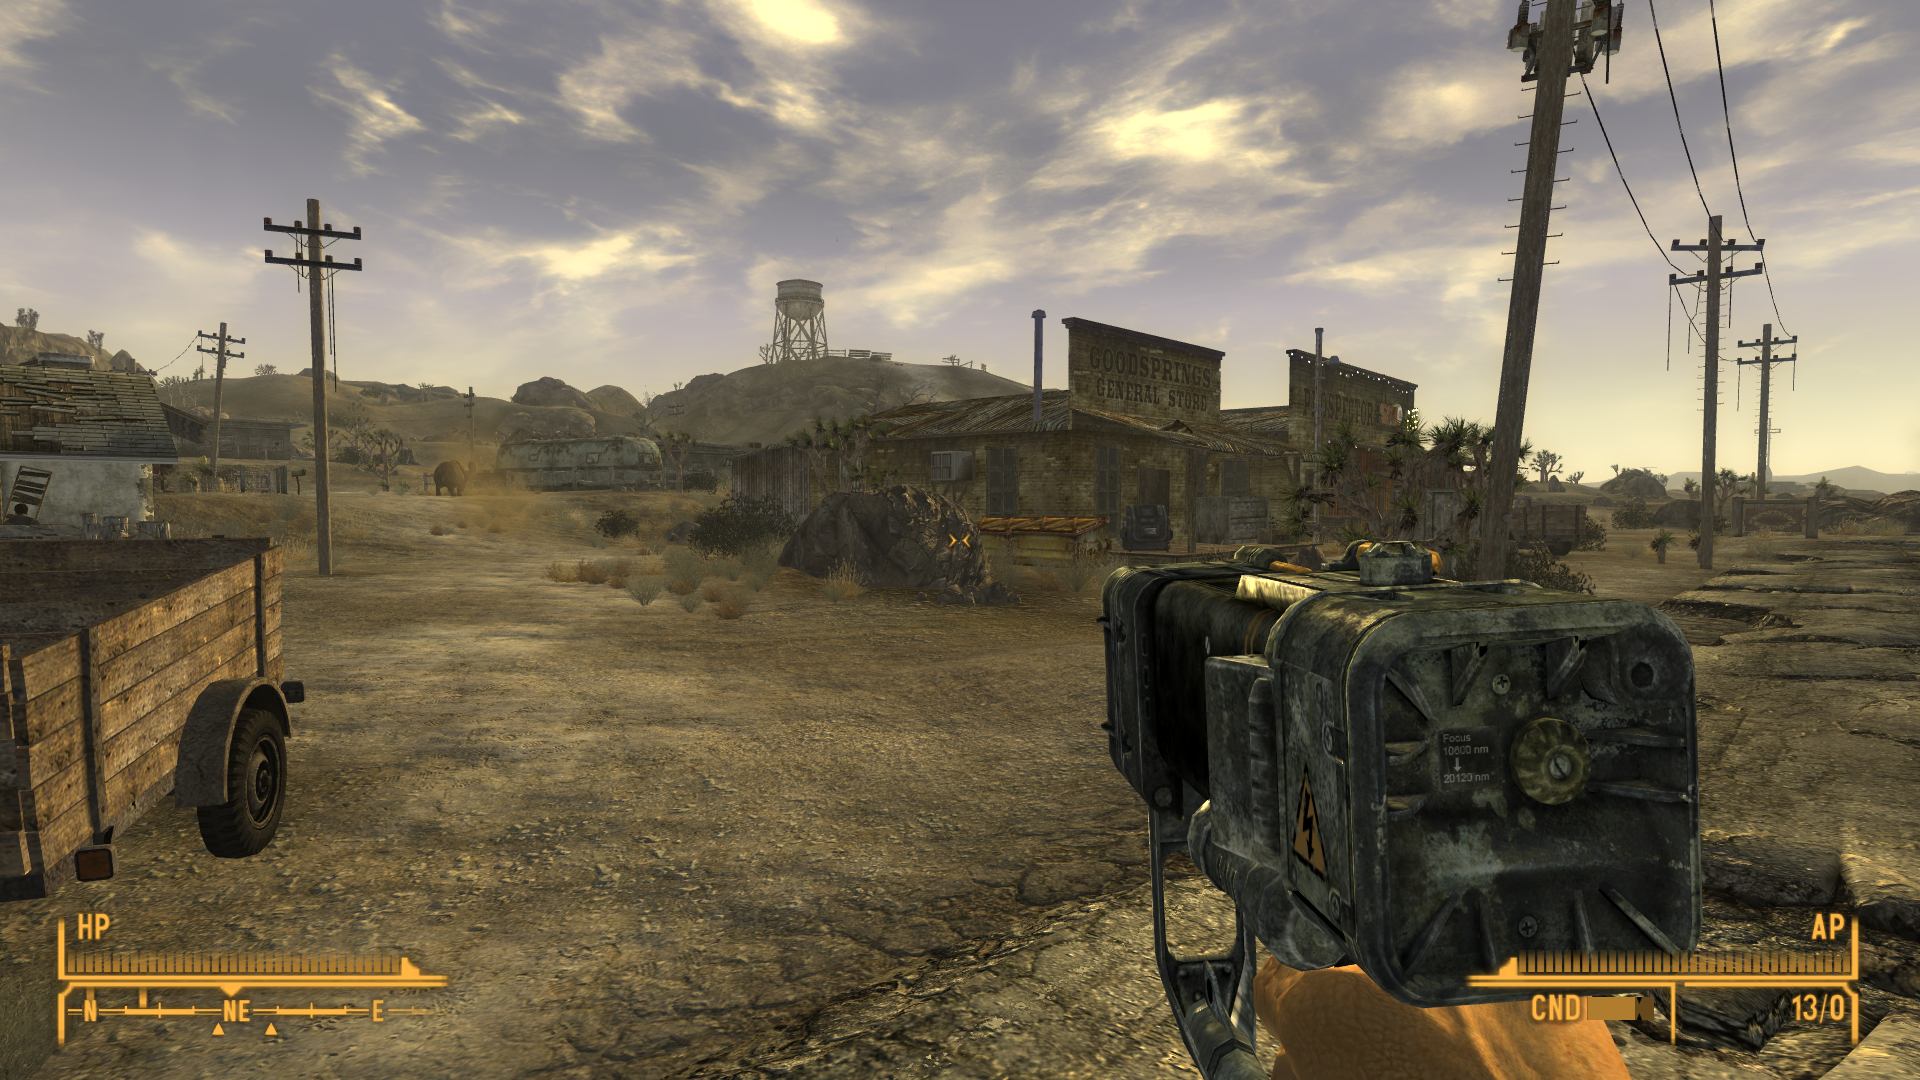 Fallout: New Vegas remains one of Obsidian's best works to date.